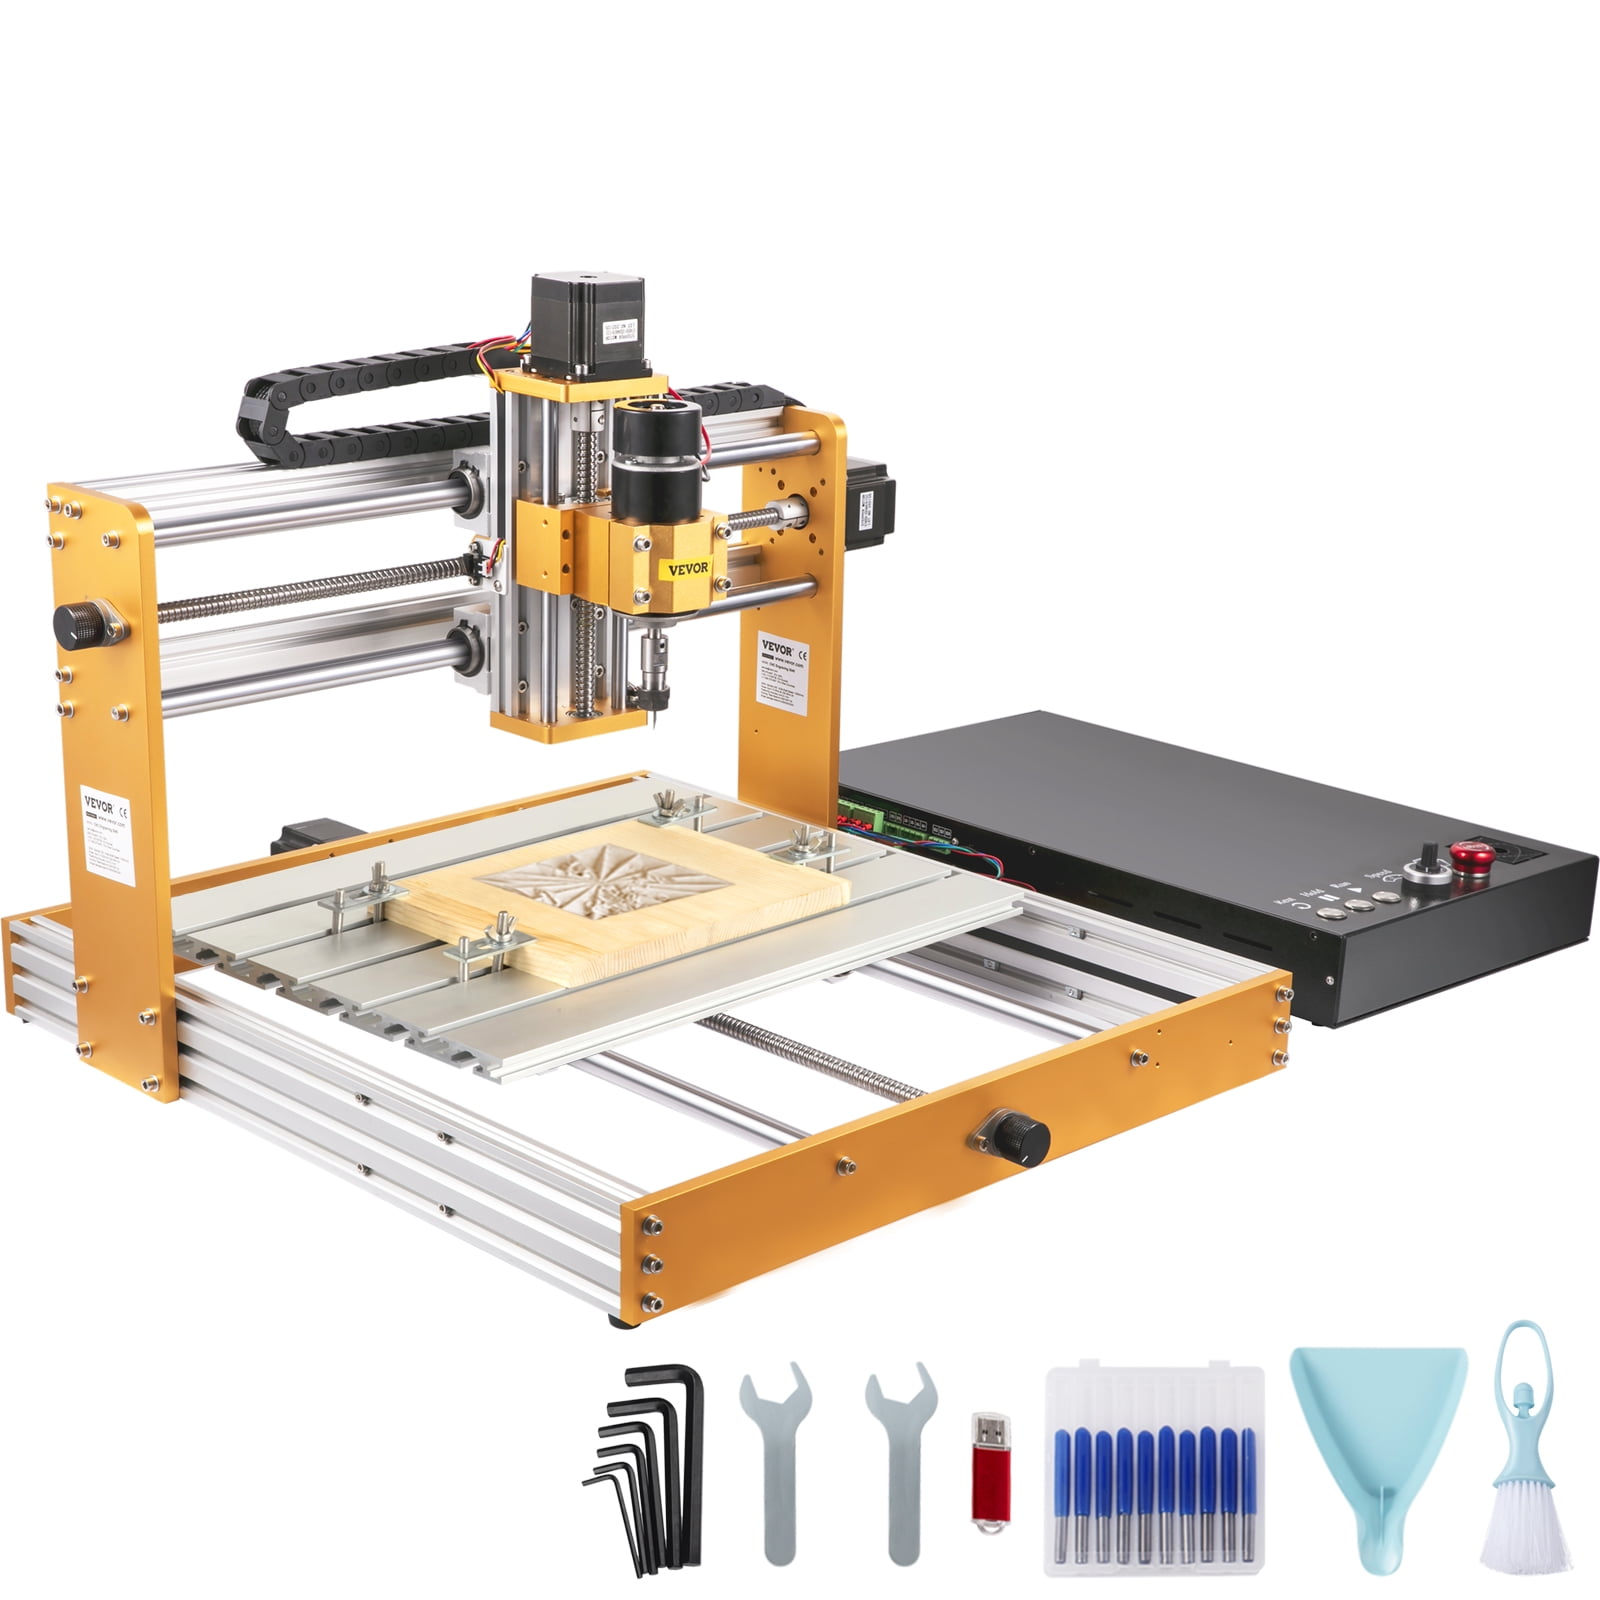 Scheiding Gluren Mondwater VEVOR CNC Router Machine, 3040 Engraver Milling Machine with Offline  Controller Limit Switches Emergency-Stop, DIY 3 Axes Cutting Kit for Wood  Metal Acrylic MDF, 400 x 300 x 100 mm Large Working Area - Walmart.com